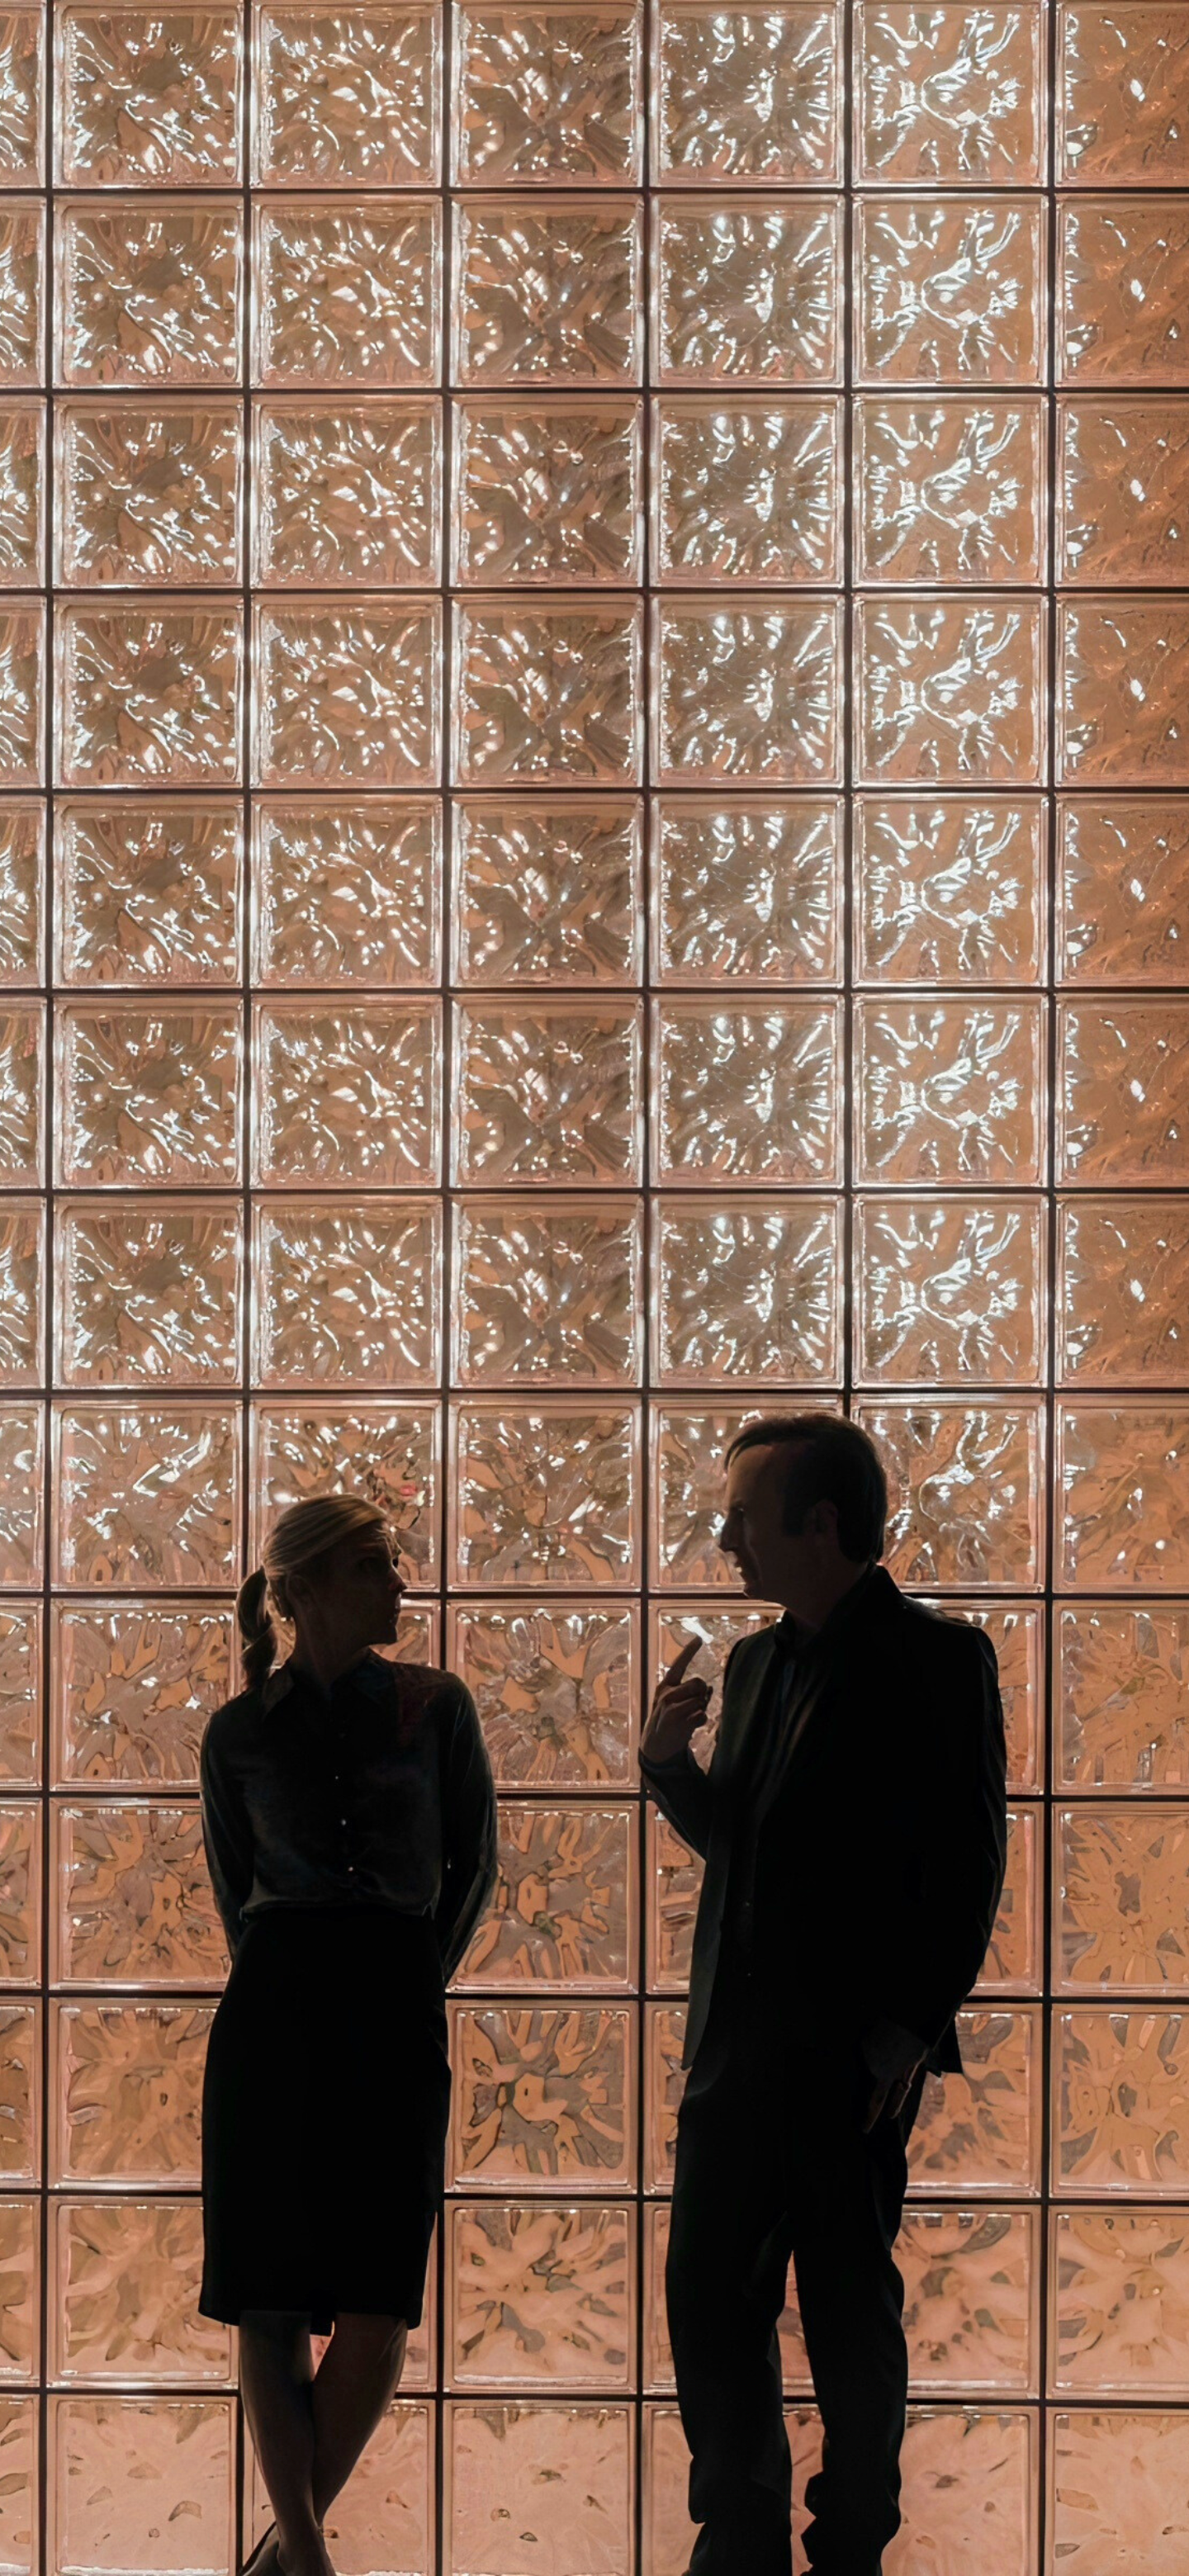 Better Call Saul- Jimmy Mcgill and Kim Wexler Phone Wallpaper. by BabyBlue